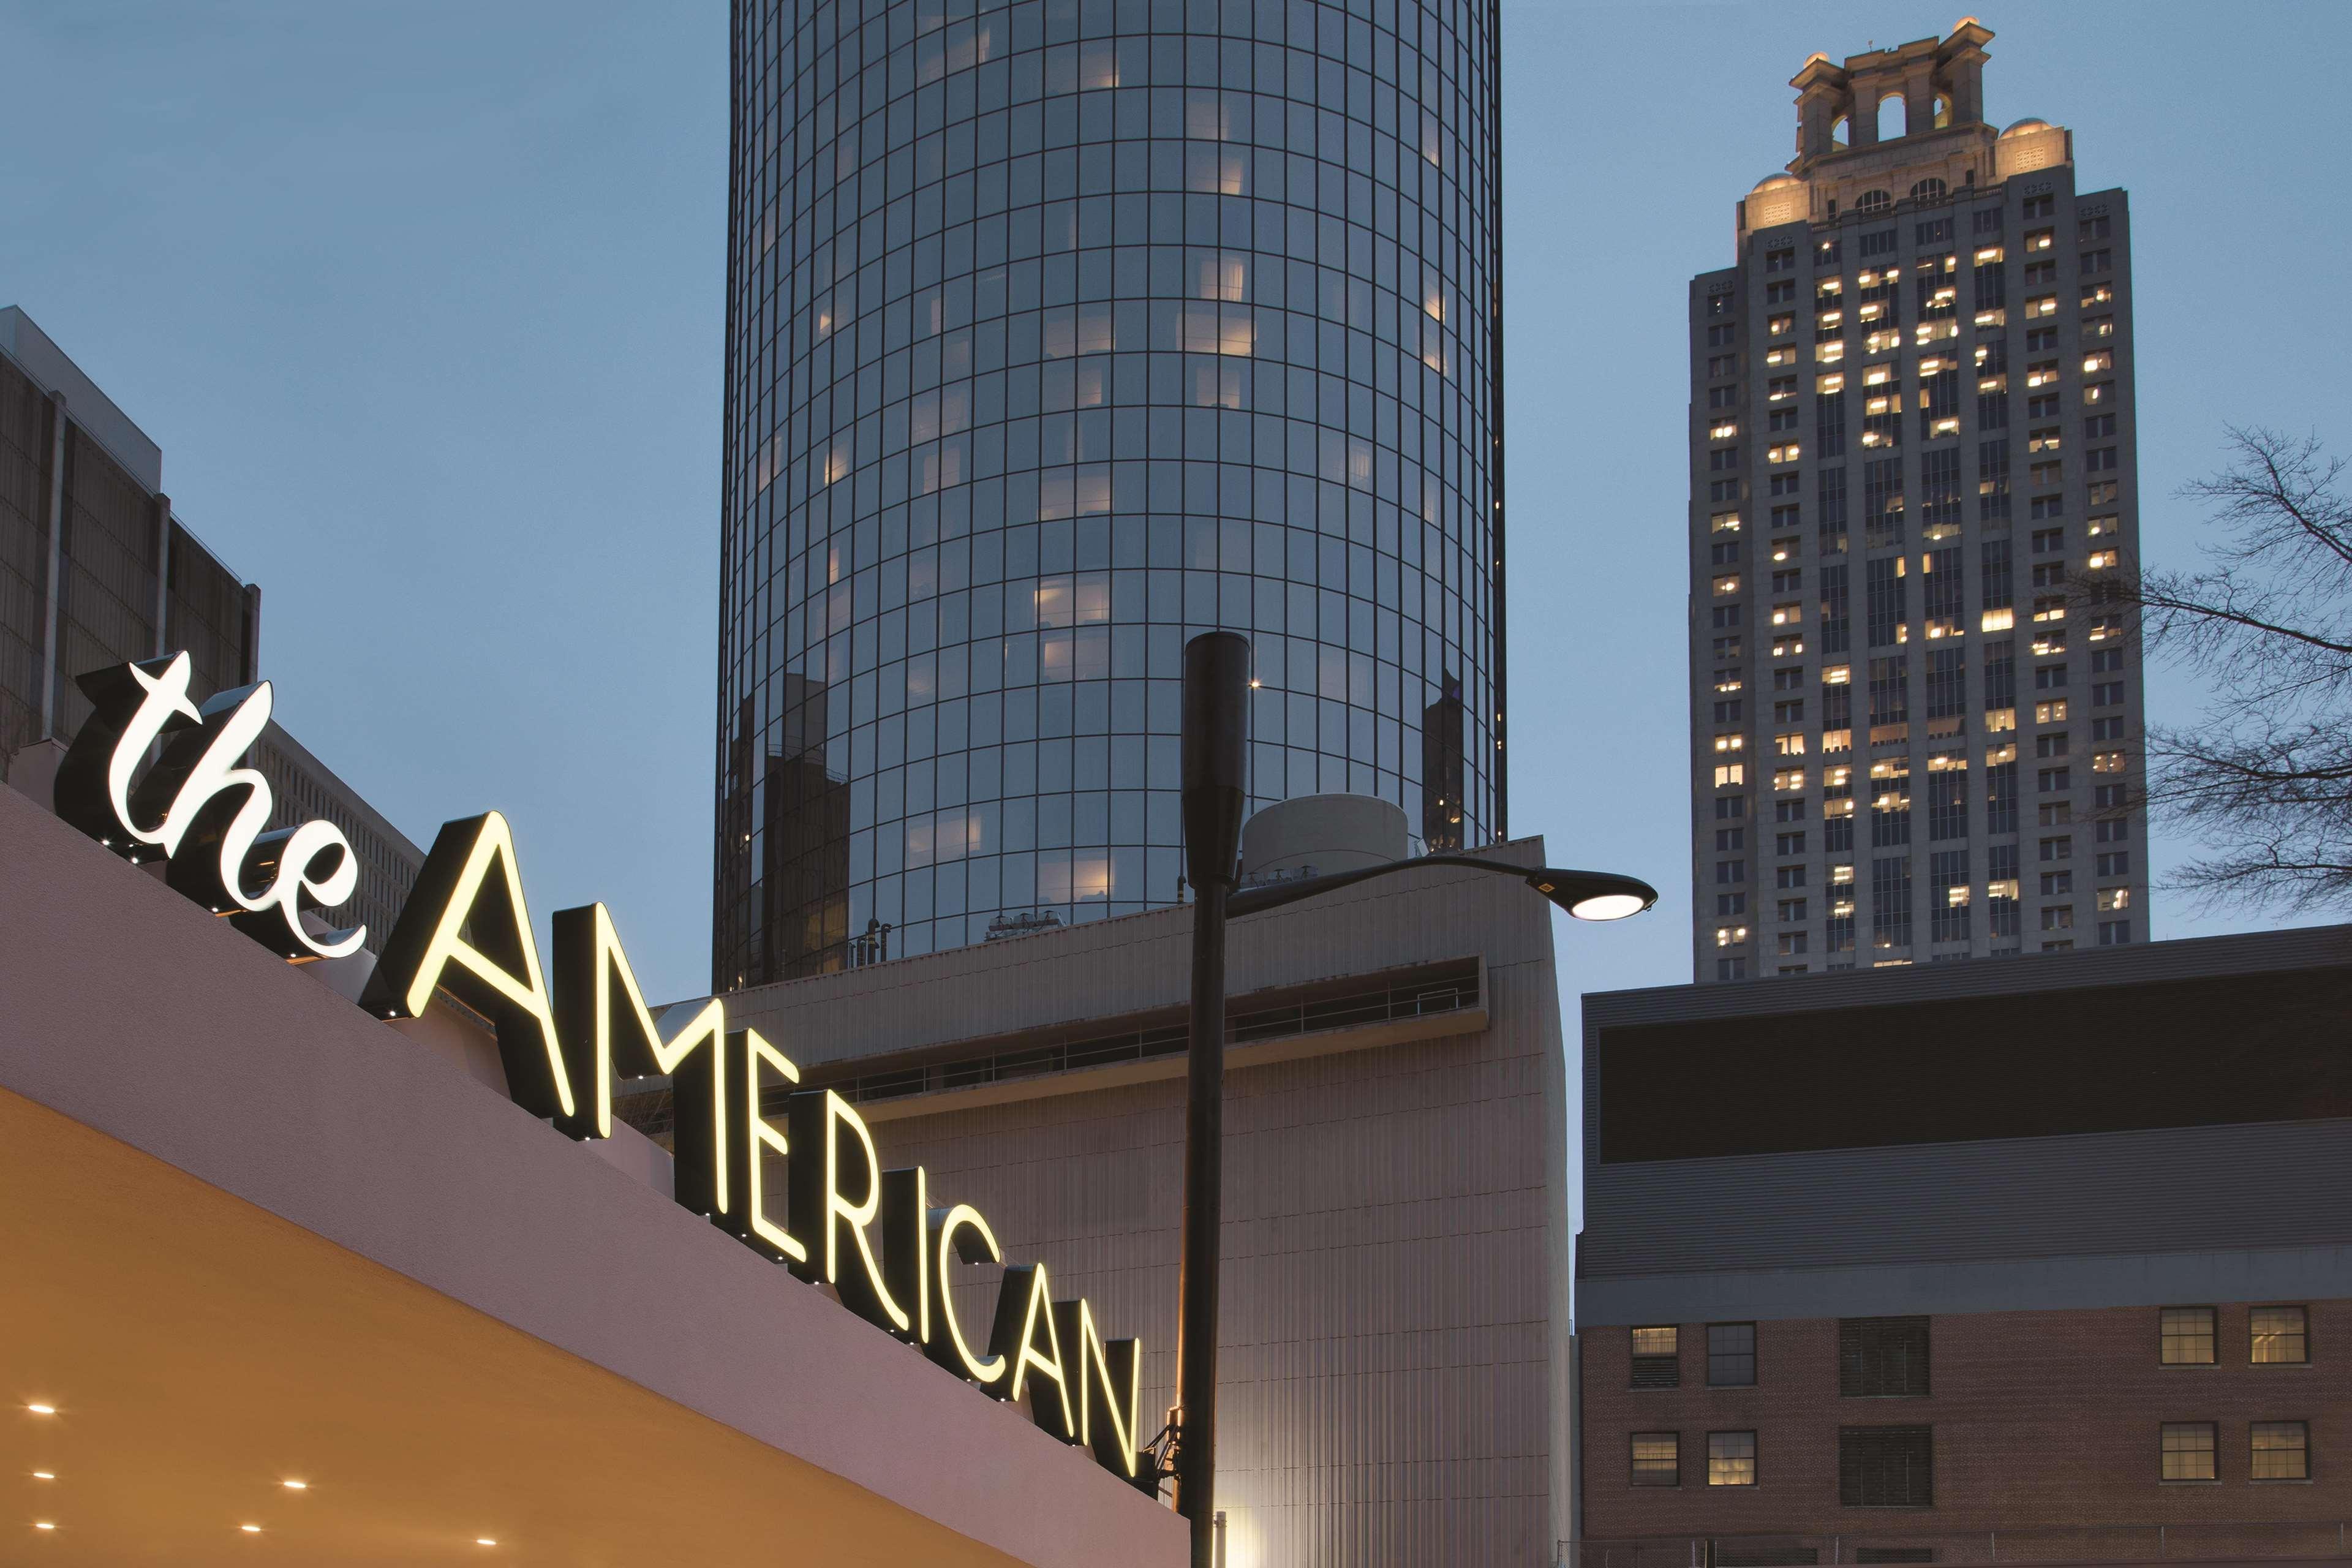 The American Hotel Atlanta Downtown-A Doubletree By Hilton Exterior foto